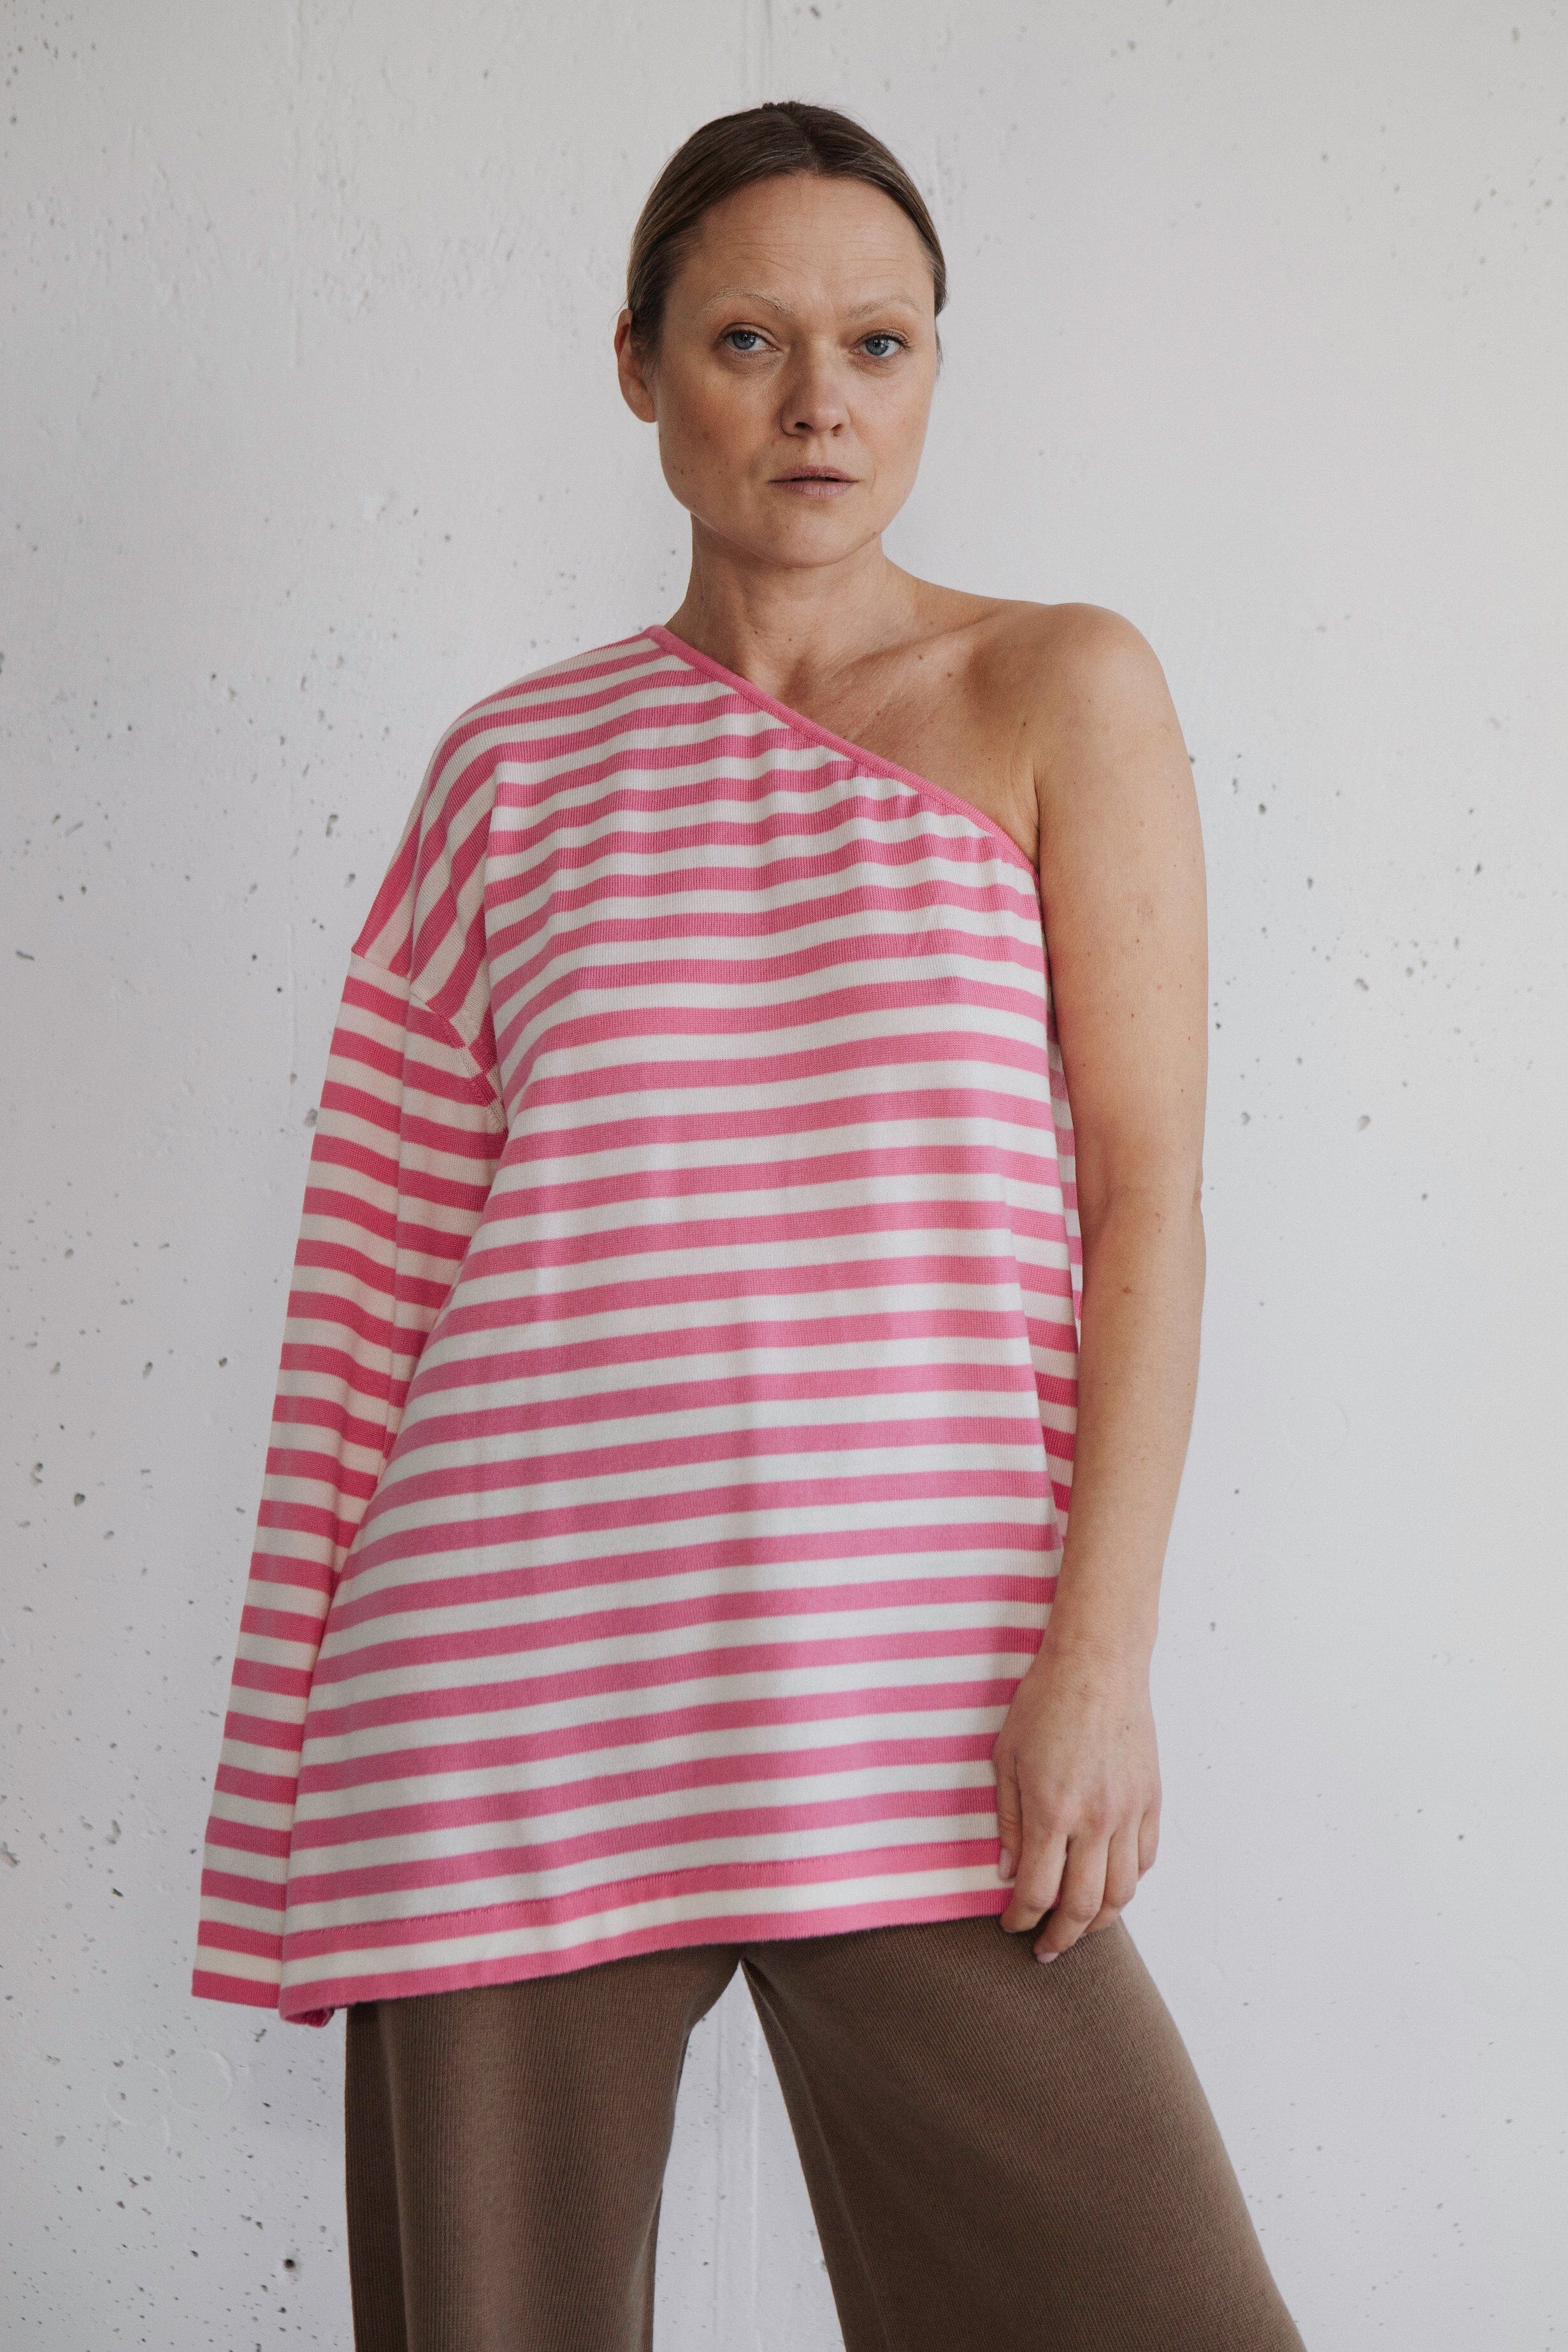 PEARL/PINK EXTRA FINE MERINO WOOL ONE SHOULDER SHIRT for lovers and trees 